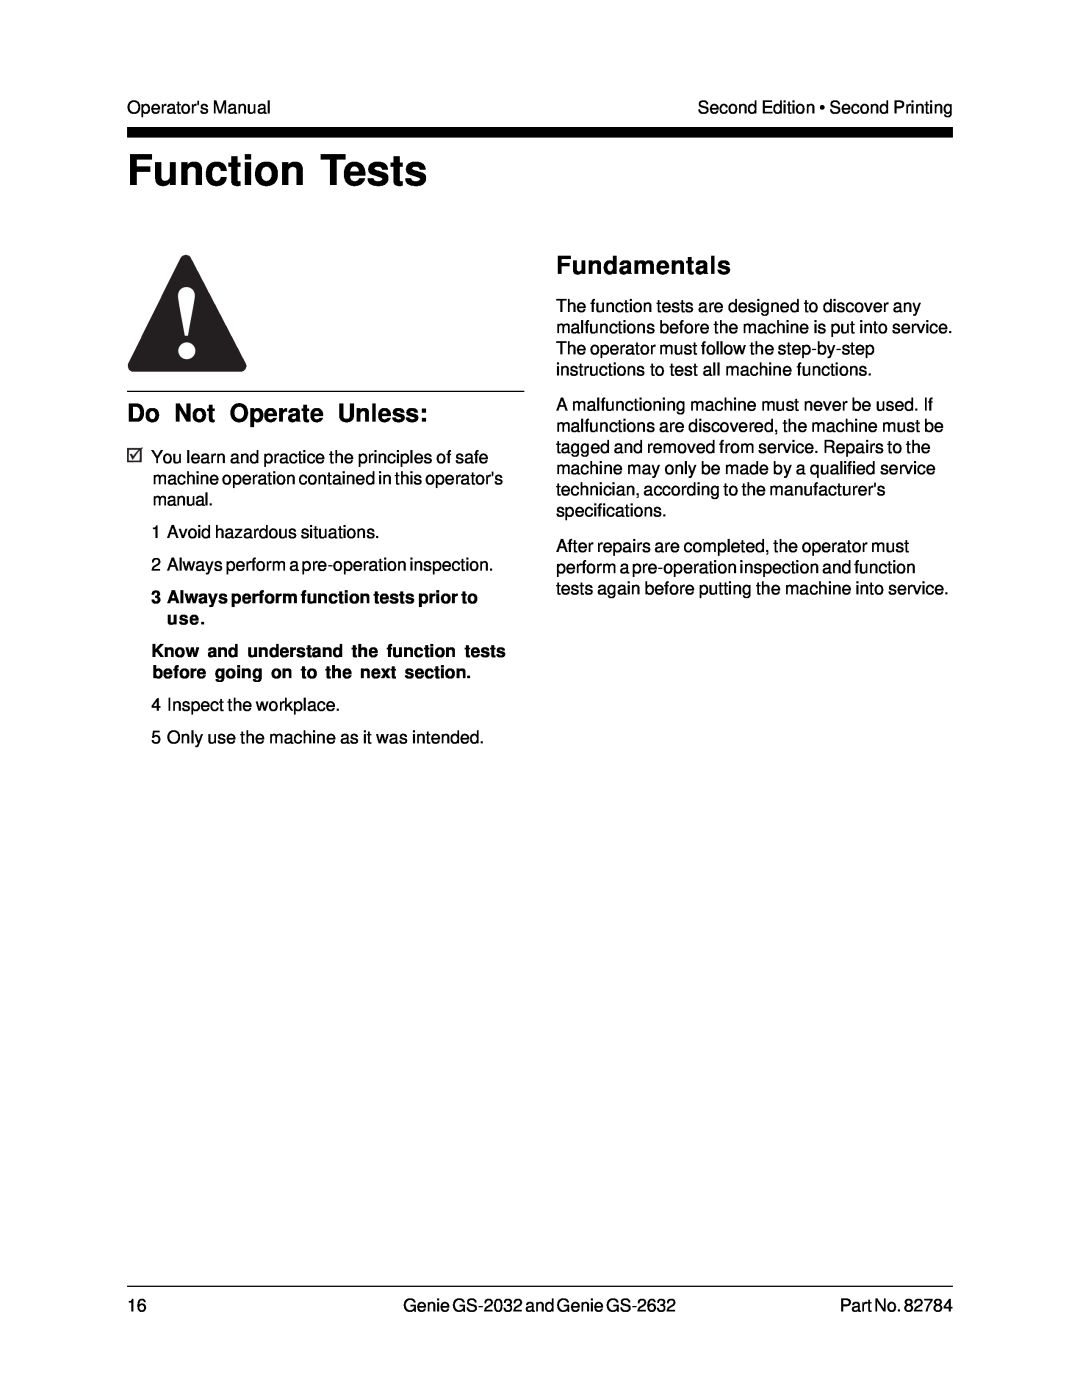 Genie GS-2032, CE, 82784 Function Tests, 3Always perform function tests prior to use, Do Not Operate Unless, Fundamentals 